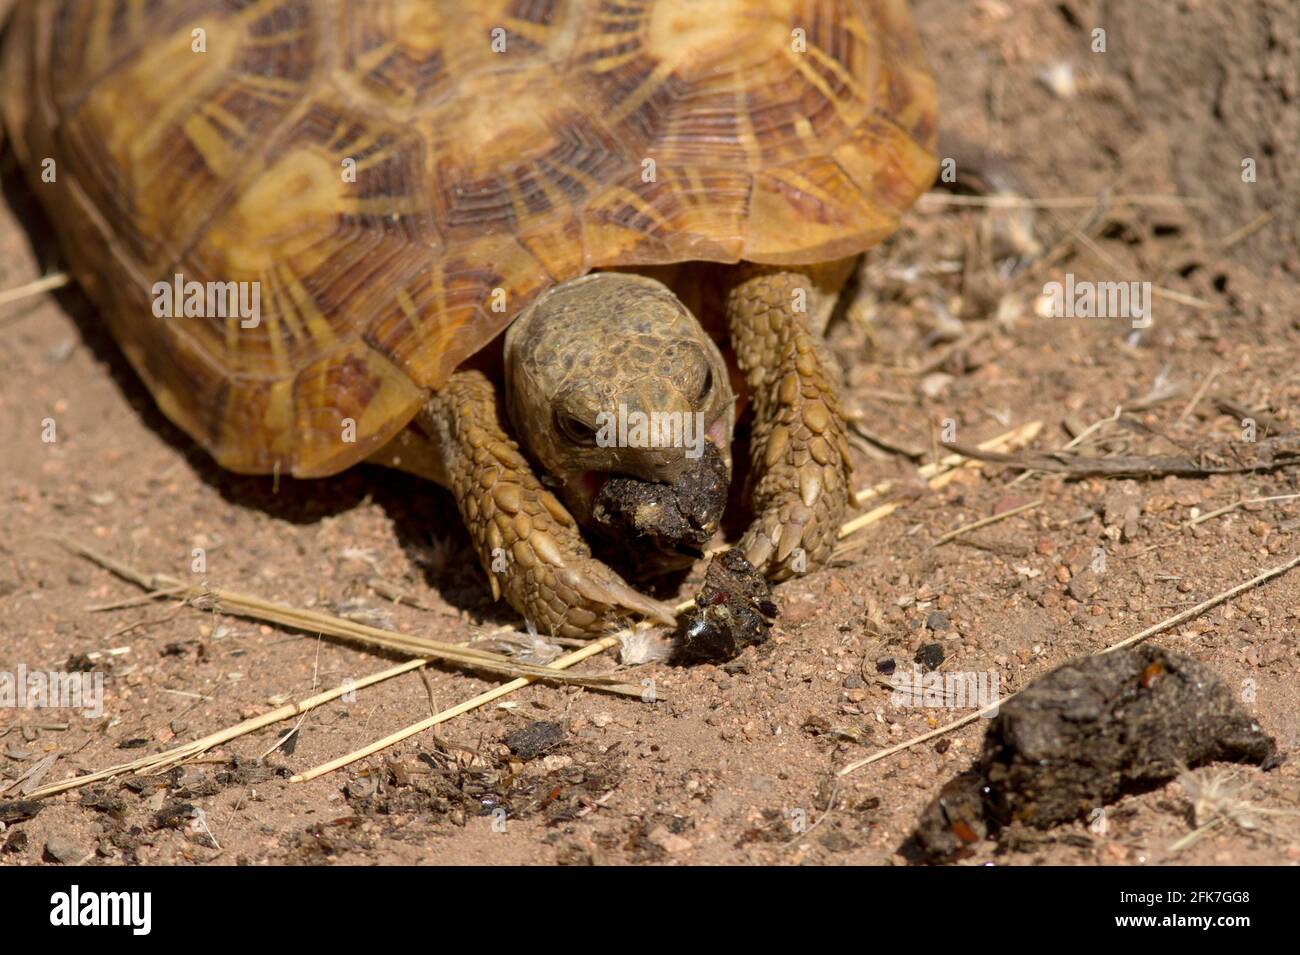 The Pancake Tortoise is endemic to central East Africa and threatened by illegal collection for the pet trade. This one is eating genet droppings Stock Photo